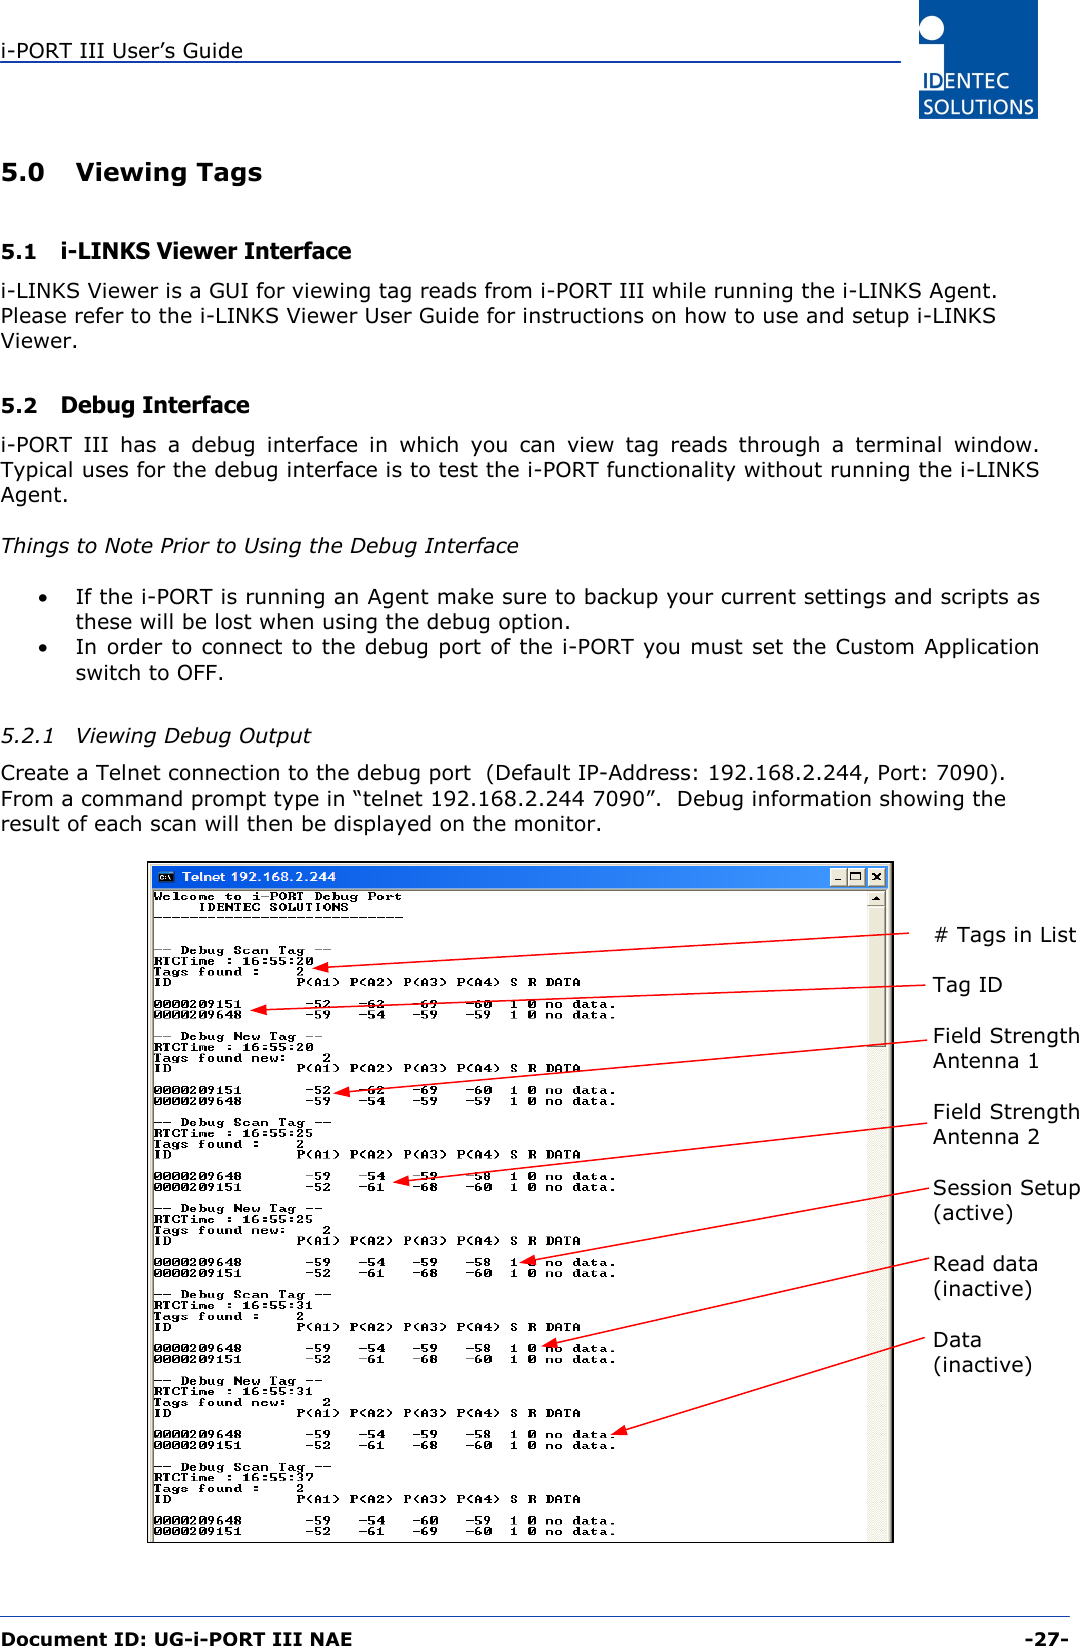 i-PORT III User’s Guide  Document ID: UG-i-PORT III NAE     -27-  5.0 Viewing Tags  5.1  i-LINKS Viewer Interface i-LINKS Viewer is a GUI for viewing tag reads from i-PORT III while running the i-LINKS Agent.  Please refer to the i-LINKS Viewer User Guide for instructions on how to use and setup i-LINKS Viewer.  5.2  Debug Interface i-PORT III has a debug interface in which you can view tag reads through a terminal window.  Typical uses for the debug interface is to test the i-PORT functionality without running the i-LINKS Agent.  Things to Note Prior to Using the Debug Interface  •  If the i-PORT is running an Agent make sure to backup your current settings and scripts as these will be lost when using the debug option. •  In order to connect to the debug port of the i-PORT you must set the Custom Application switch to OFF.  5.2.1  Viewing Debug Output Create a Telnet connection to the debug port  (Default IP-Address: 192.168.2.244, Port: 7090).  From a command prompt type in “telnet 192.168.2.244 7090”.  Debug information showing the result of each scan will then be displayed on the monitor.    # Tags in List  Tag ID  Field Strength Antenna 1  Field Strength Antenna 2  Session Setup (active)  Read data (inactive)  Data (inactive) 